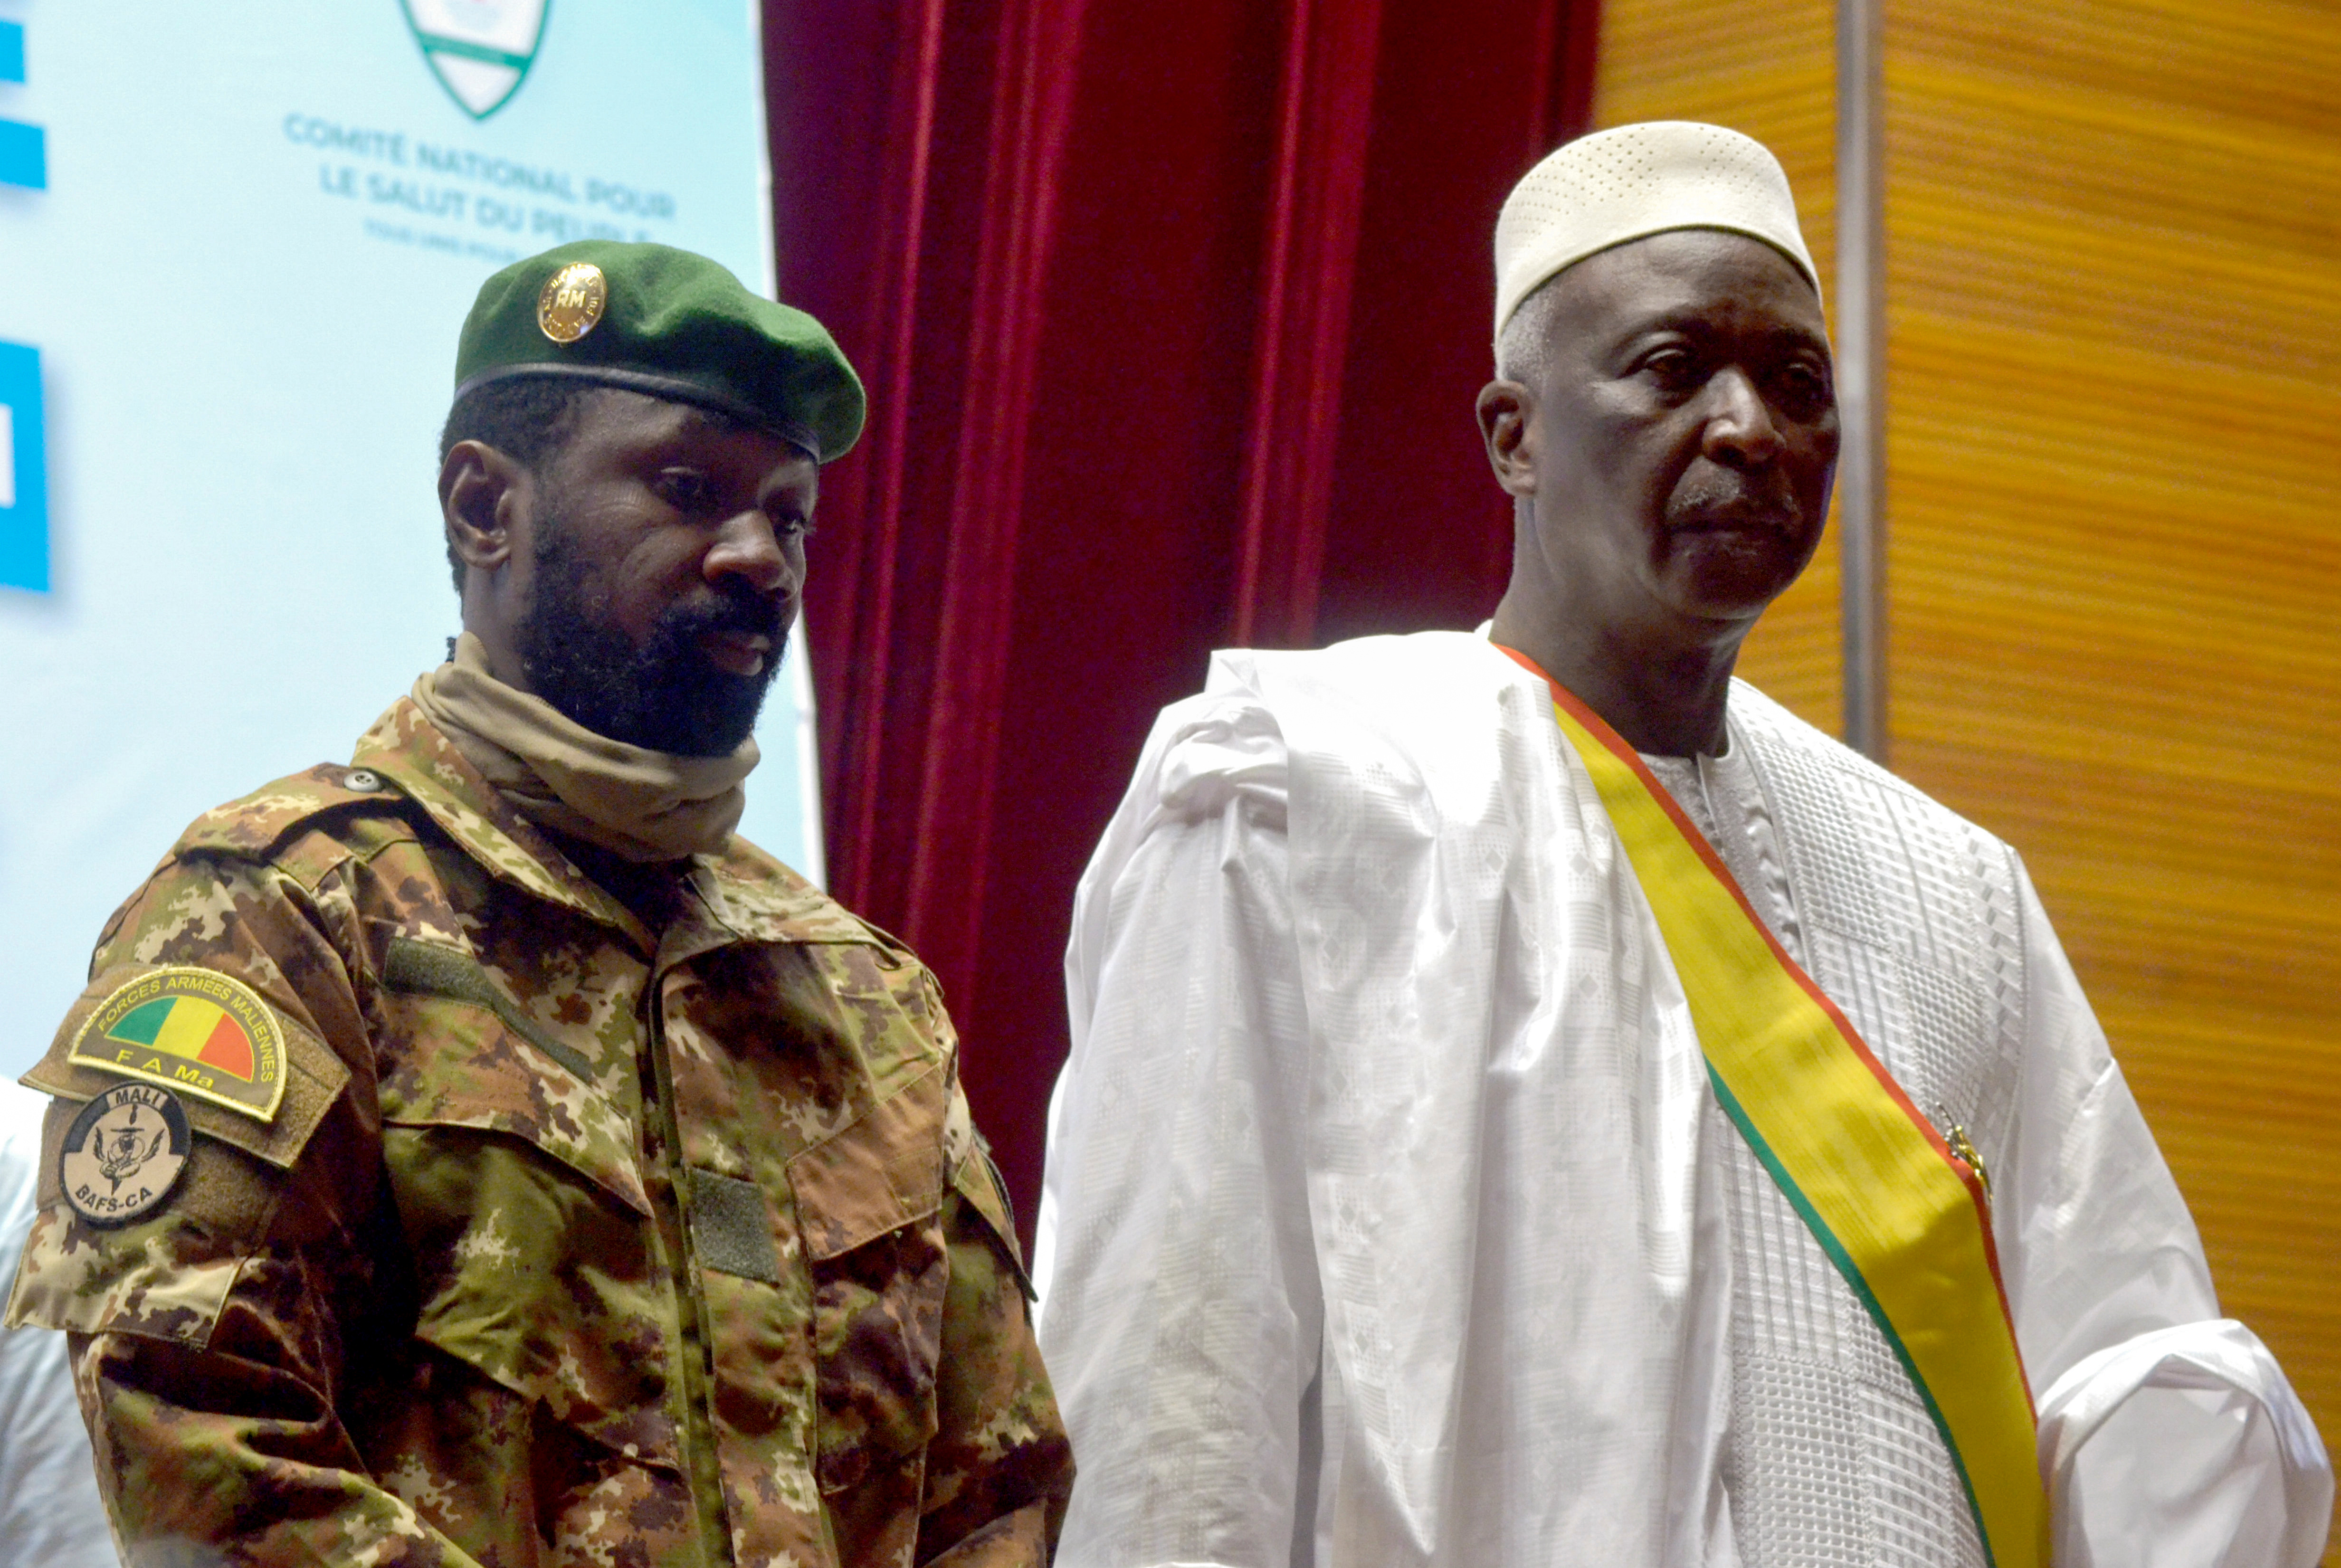 The new interim president of Mali Bah Ndaw attends the Inauguration ceremony with the Malian new vice president Colonel Assimi Goita in Bamako